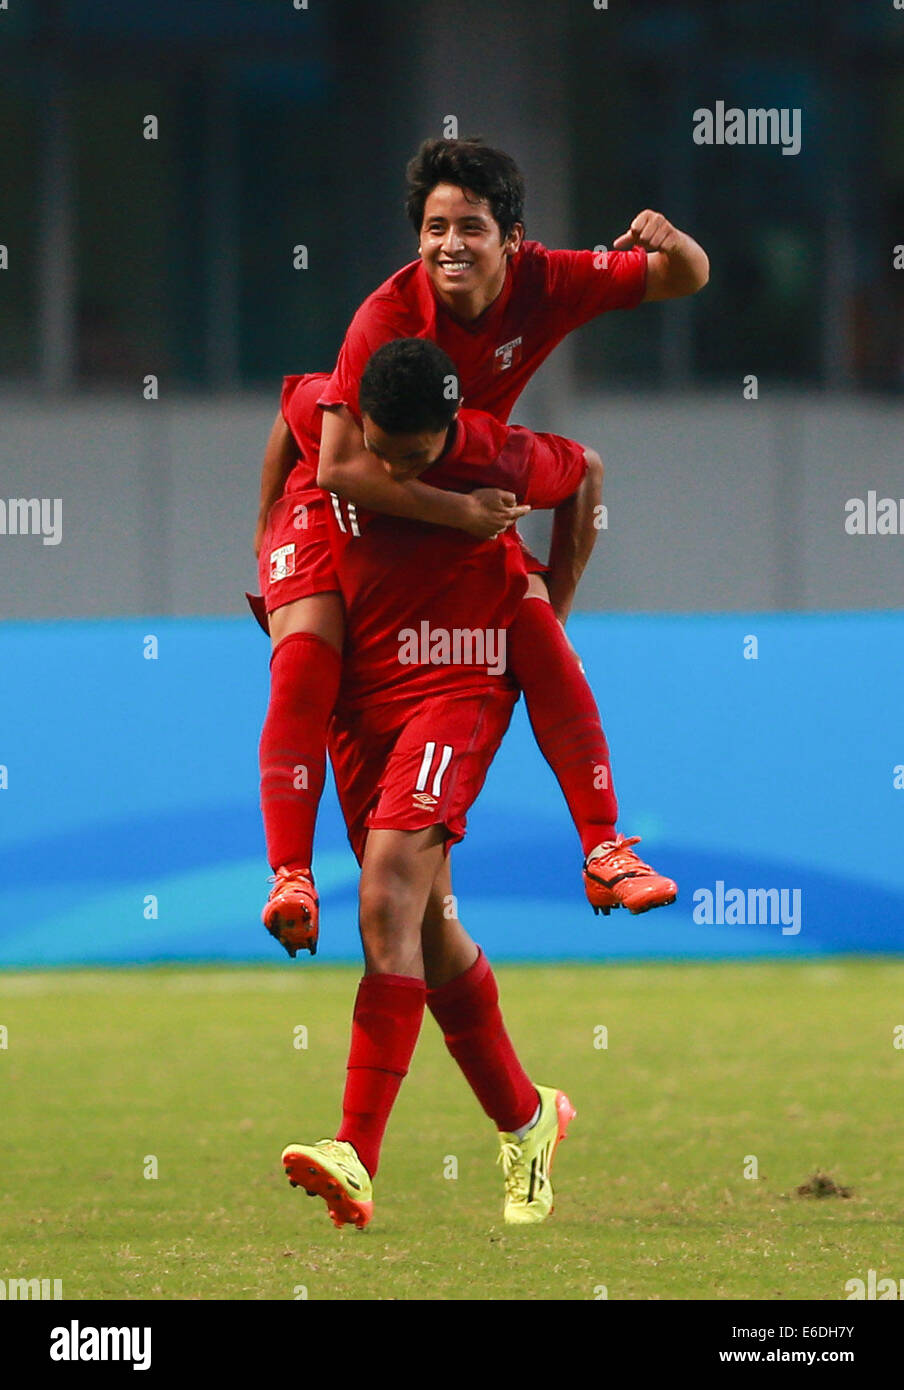 Nanjing, China's Jiangsu Province. 21st Aug, 2014. Athletes of Peru celebrate after winning the preliminary round of football event during Nanjing 2014 Youth Olympic Games in Nanjing, capital of east China's Jiangsu Province, on Aug. 21, 2014. Team Peru won team Honduras. Credit:  Chen Yichen/Xinhua/Alamy Live News Stock Photo